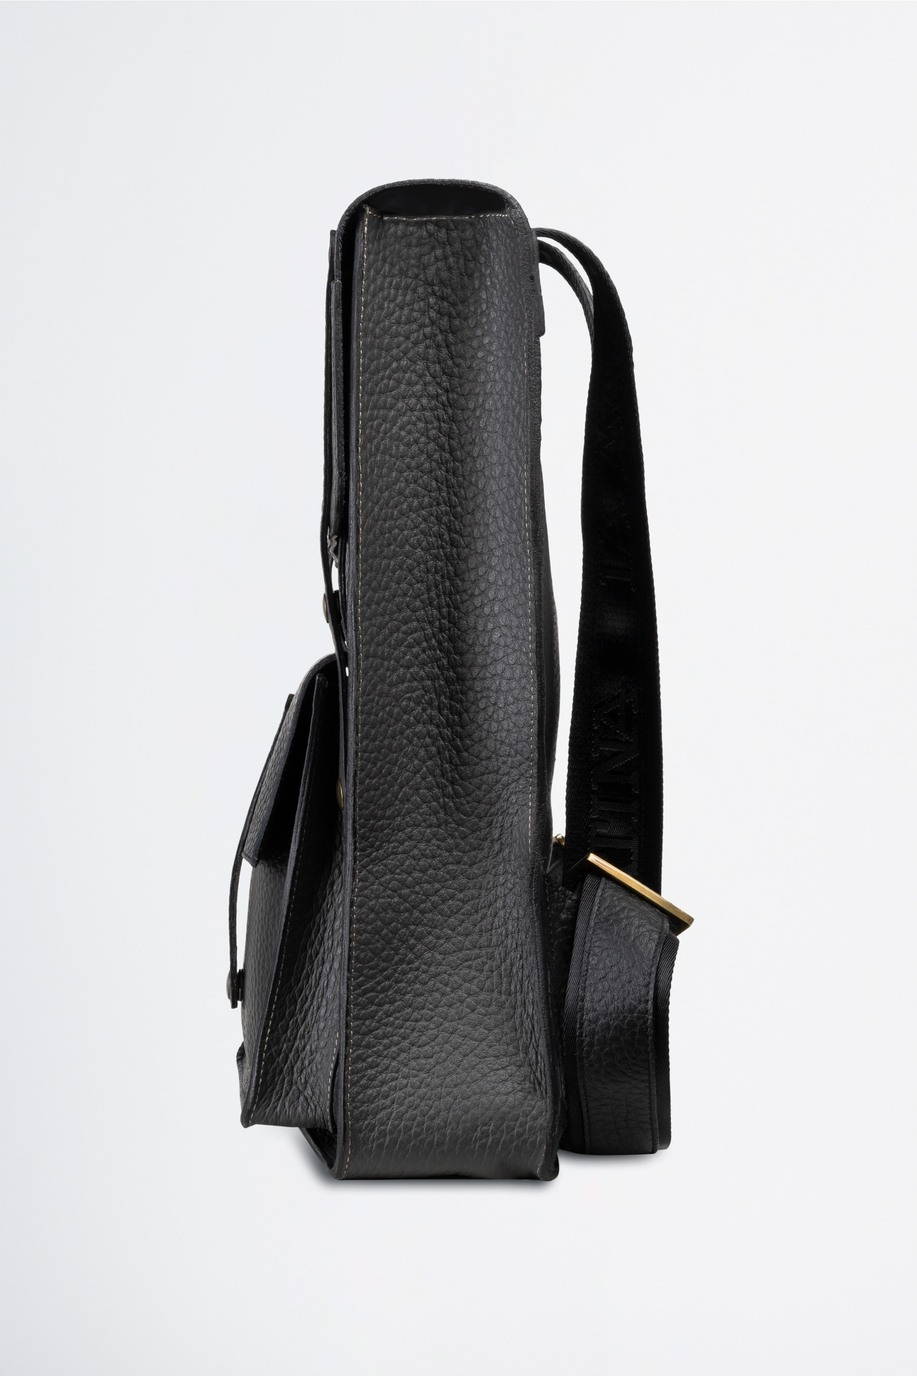 Backpack in calf leather leather - Man leather goods | La Martina - Official Online Shop